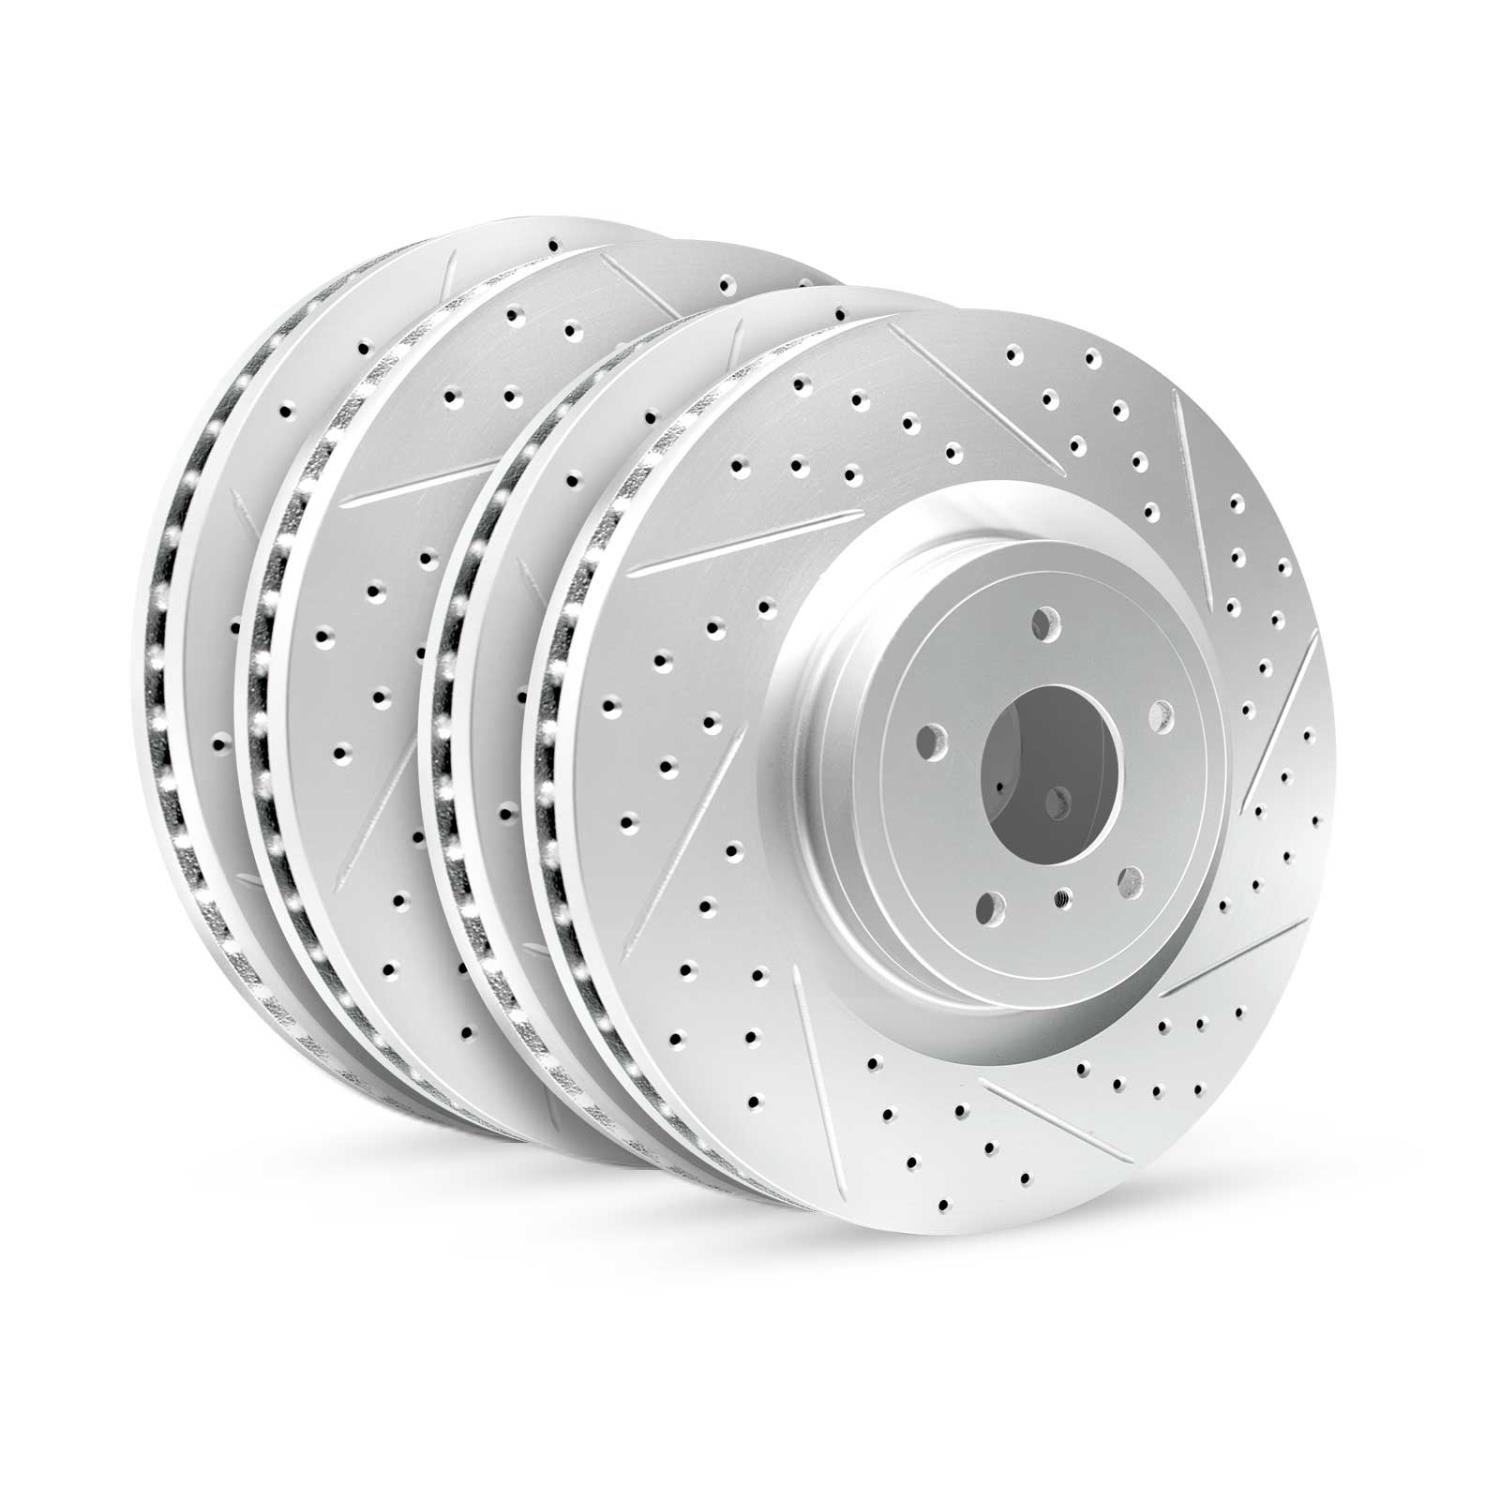 GEO-Carbon Drilled/Slotted Rotors, 2009-2010 Ford/Mazda, Position: Front/Rear